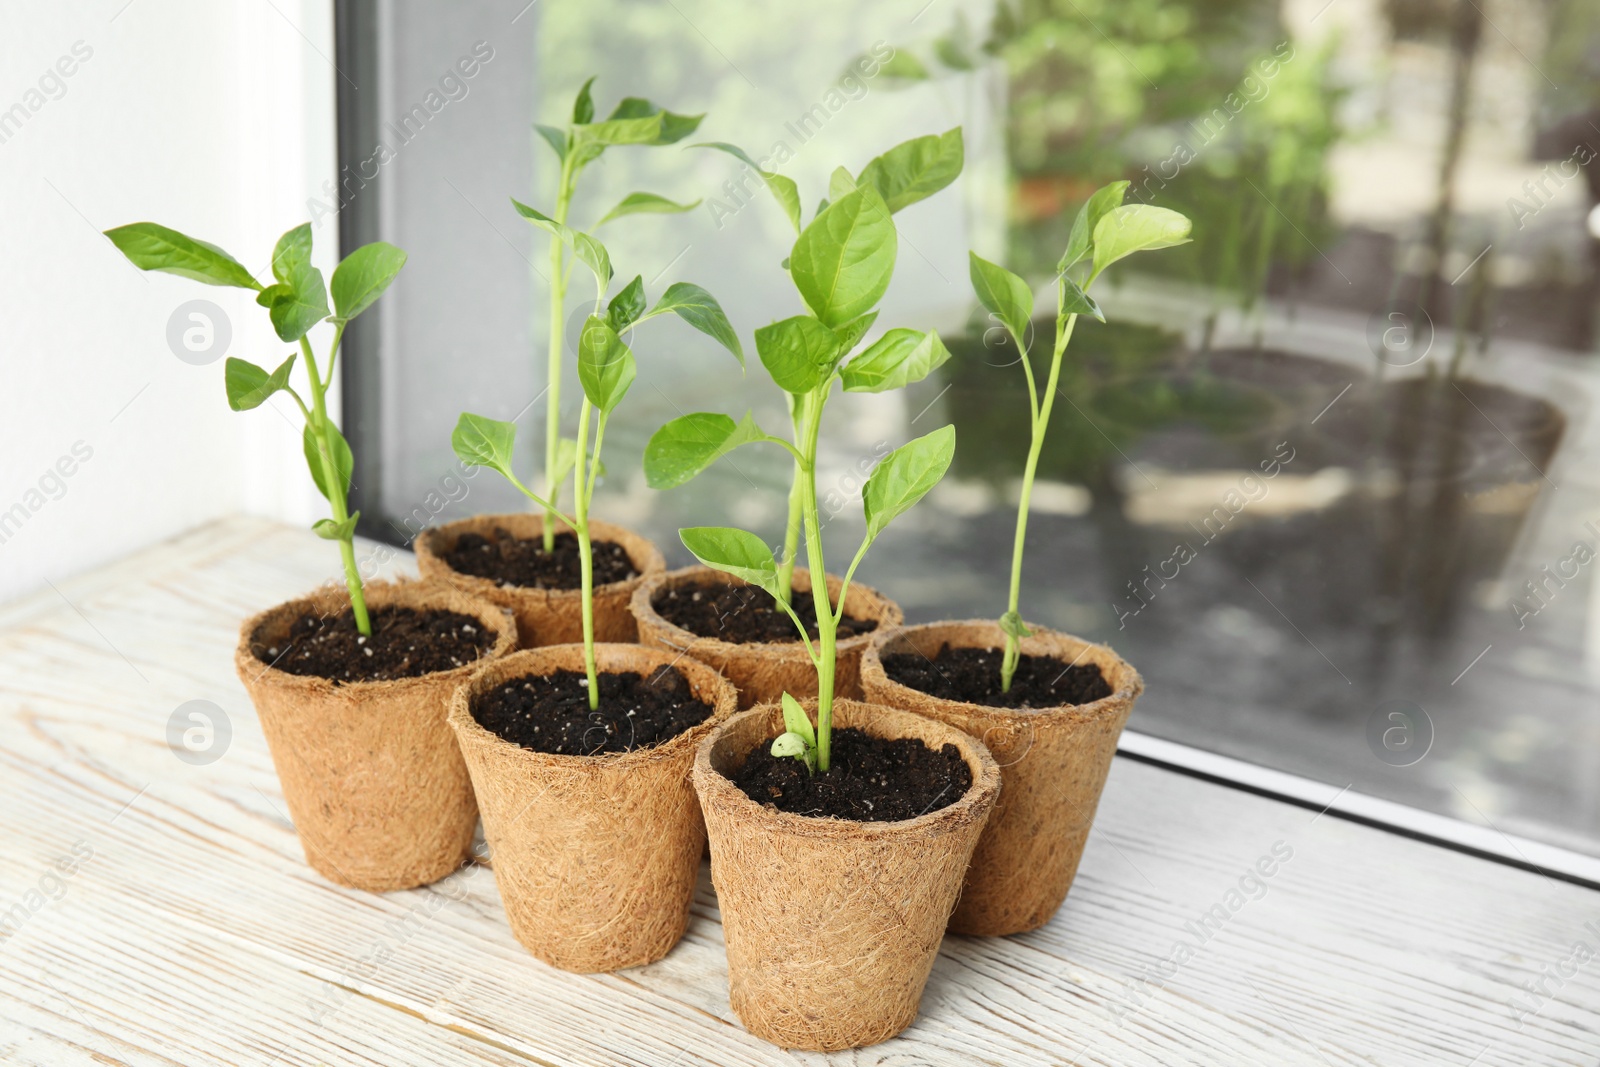 Photo of Vegetable seedlings in peat pots on wooden window sill indoors